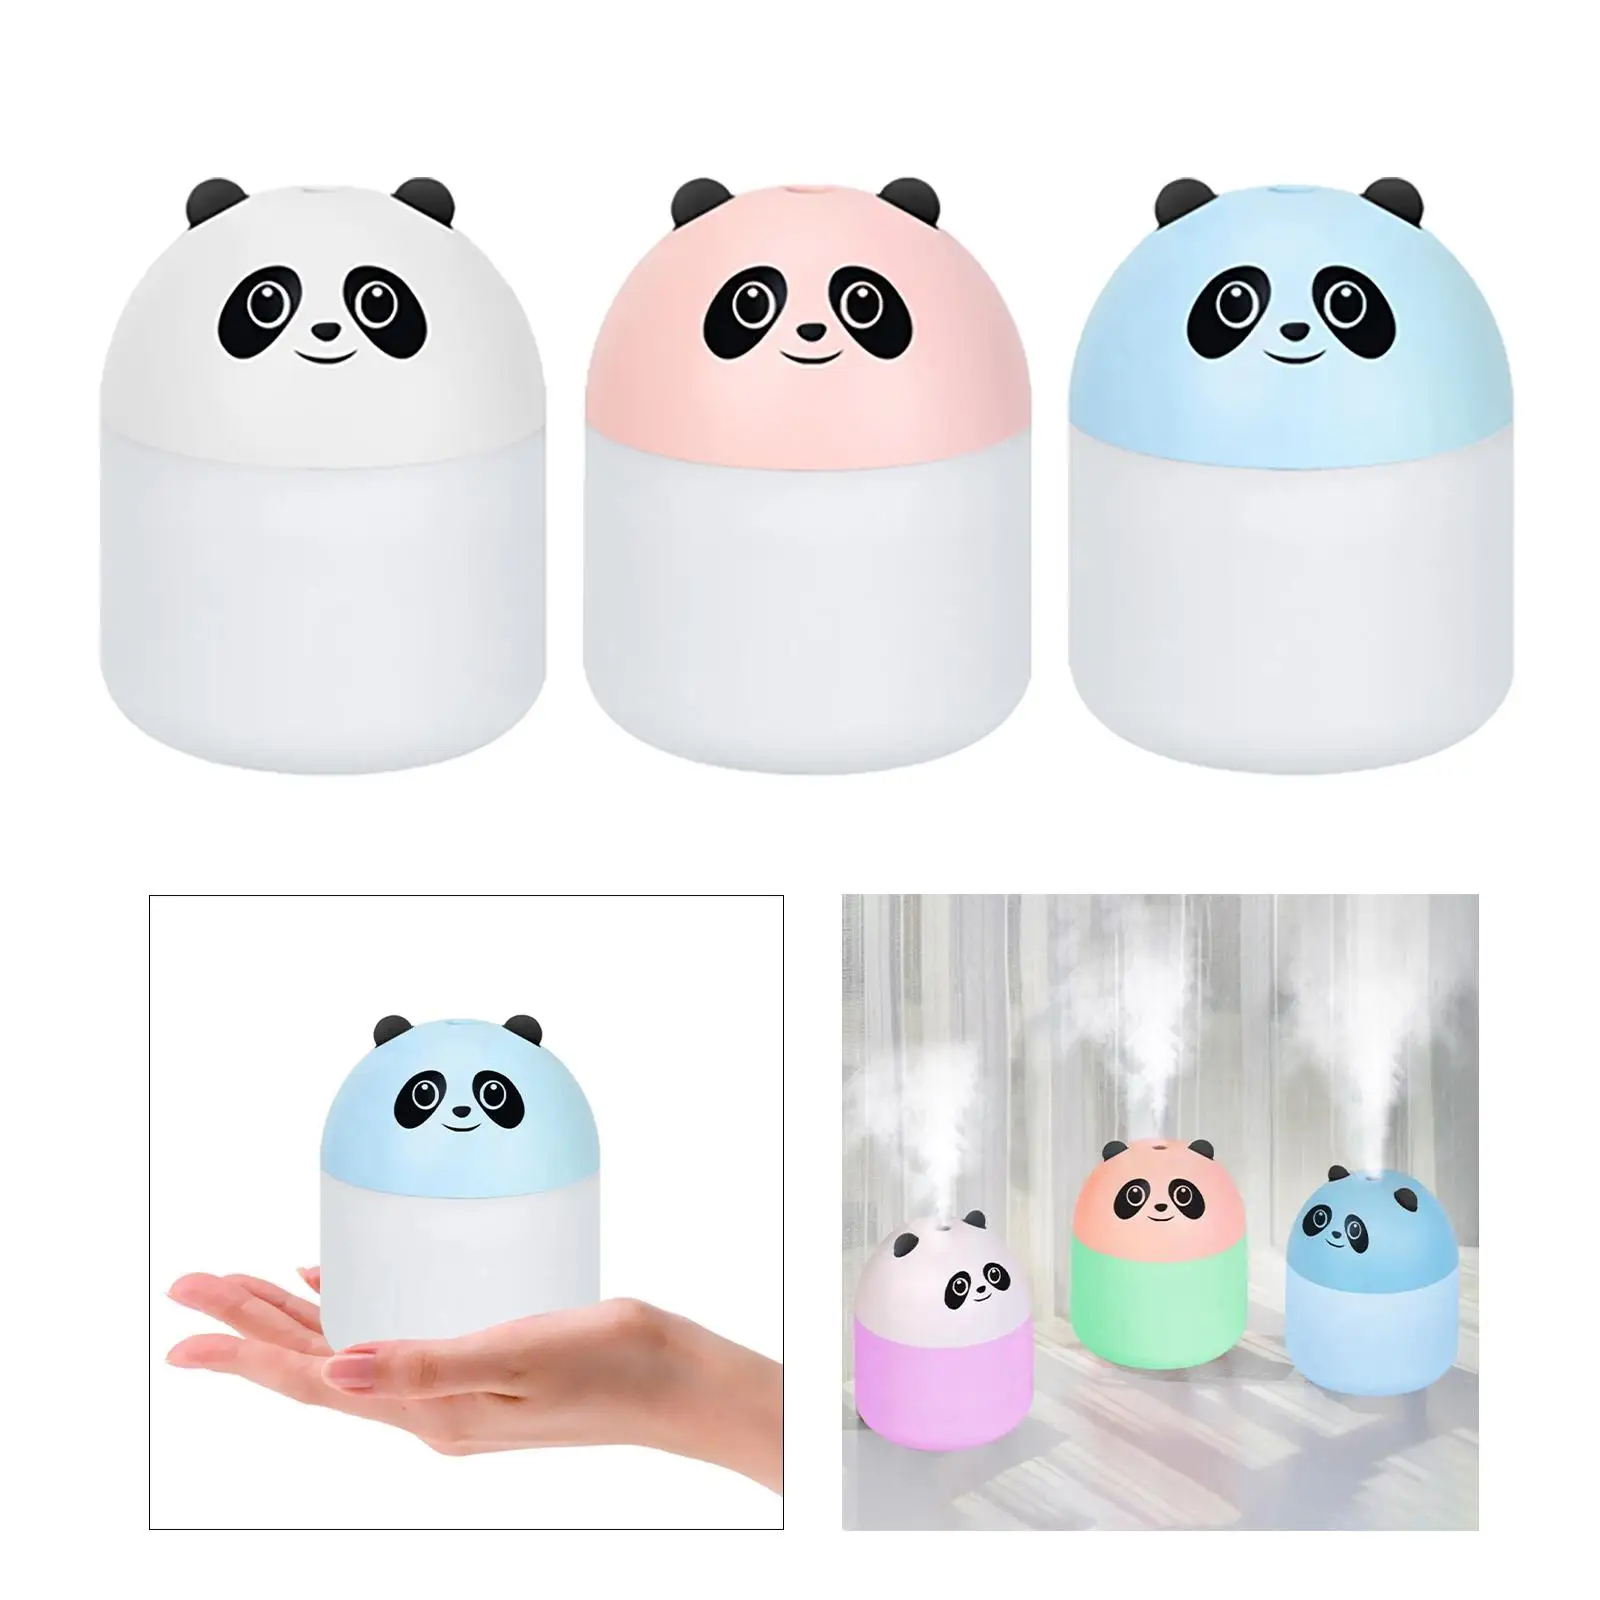 Small Air Humidifier Mist Diffuser 250ml 2 Adjustable Mist Modes for Office